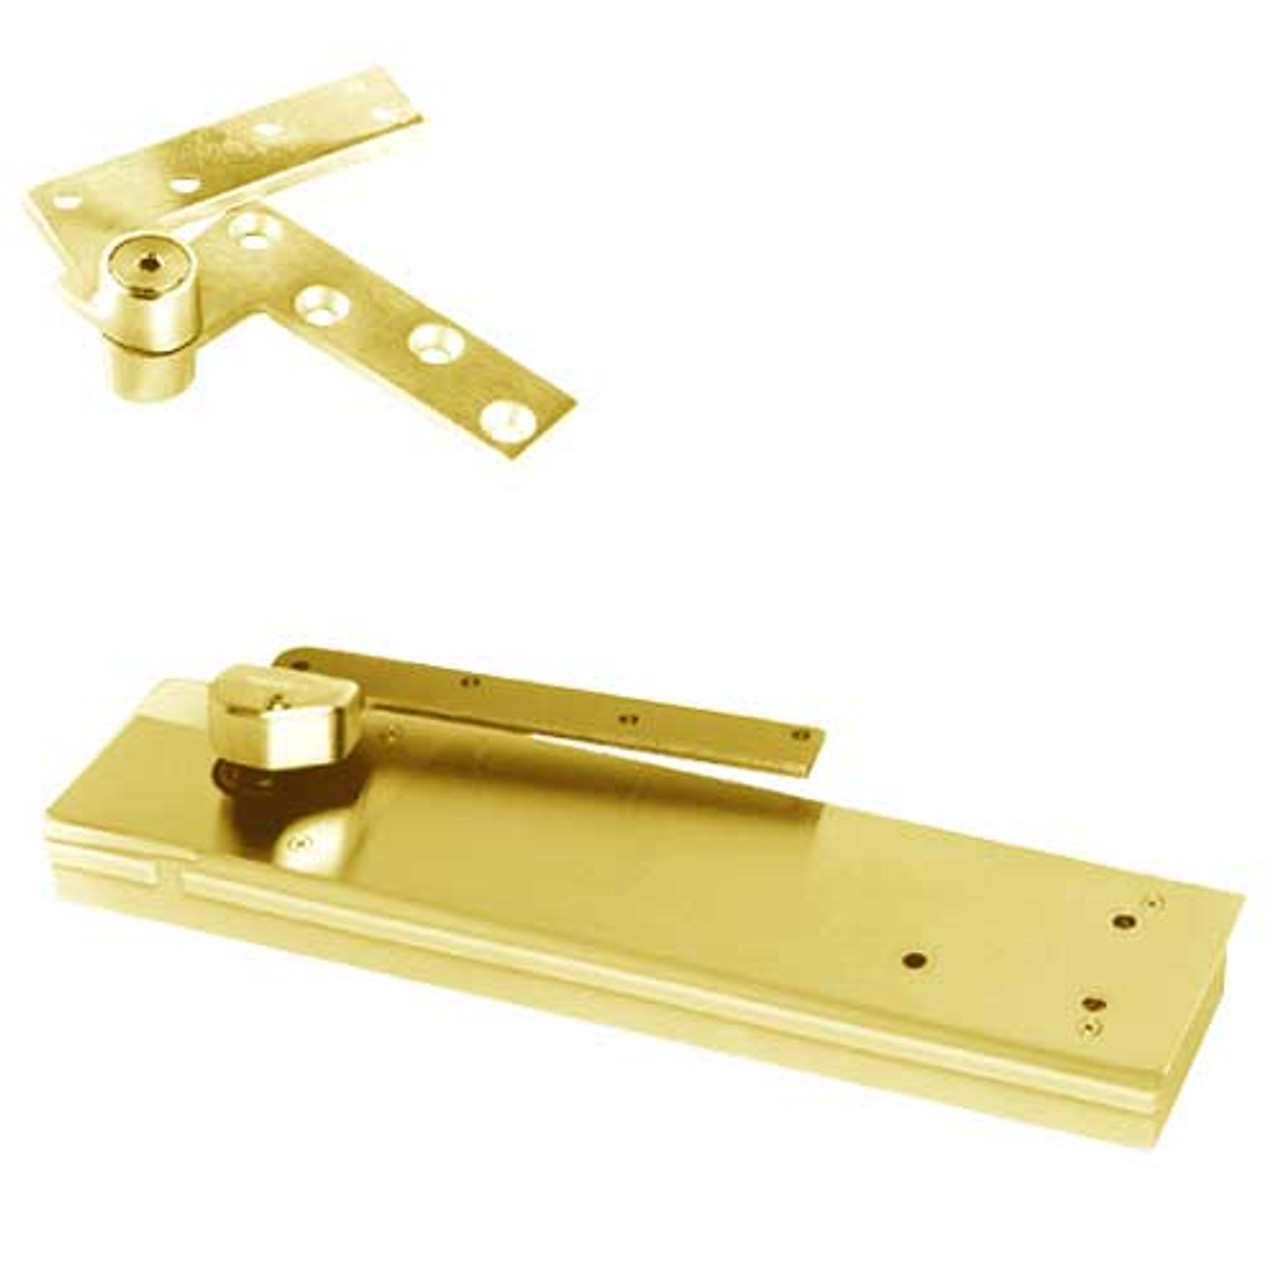 5103ABC180-1-1/2OS-RH-605 Rixson 51 Series 1-1/2" Offset Hung Shallow Depth Floor Closers in Bright Brass Finish